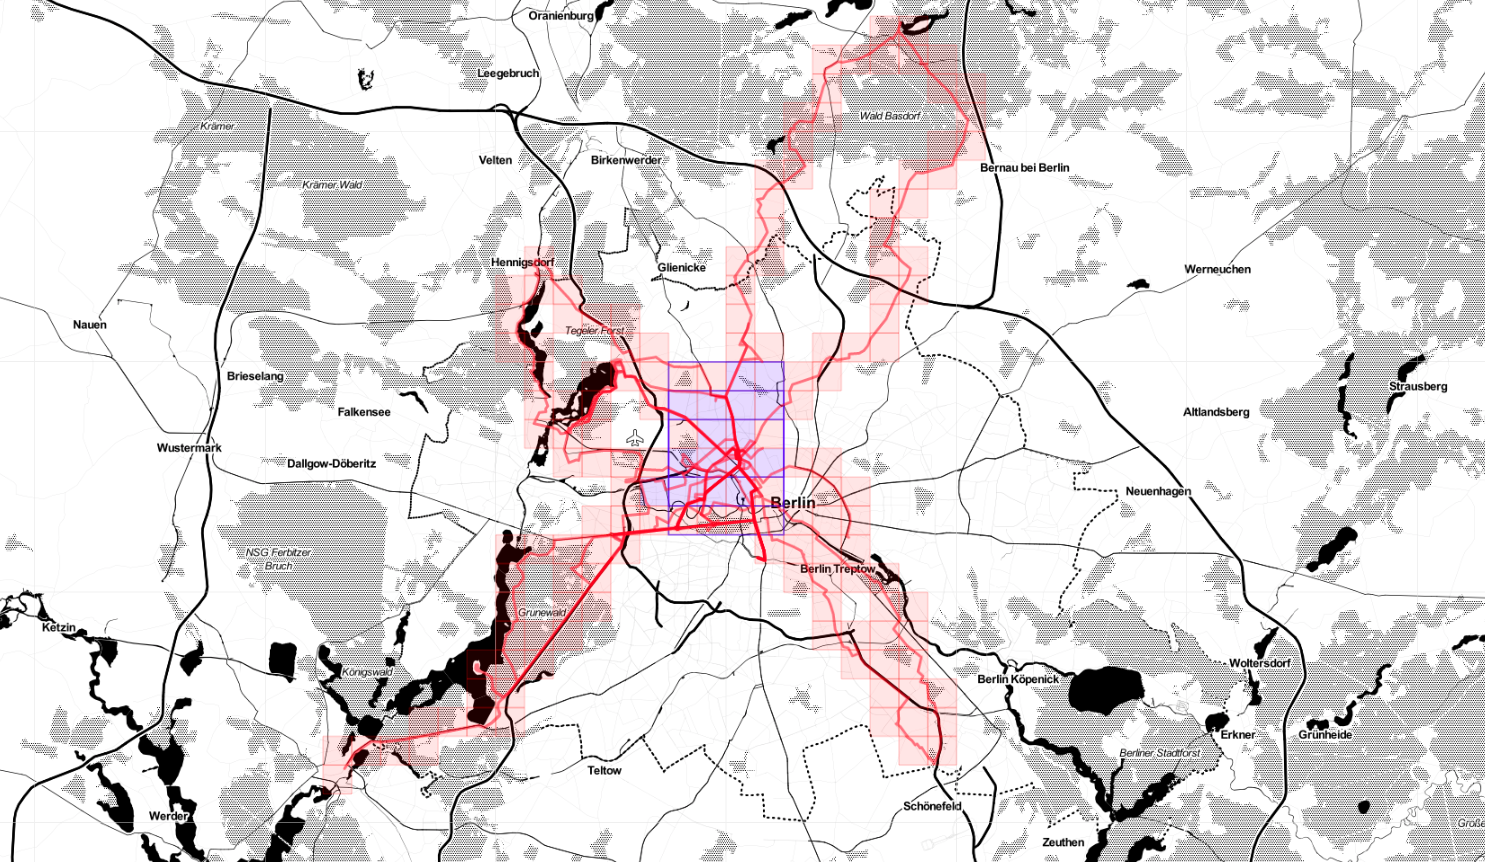 veloviewer-square-20200401.png